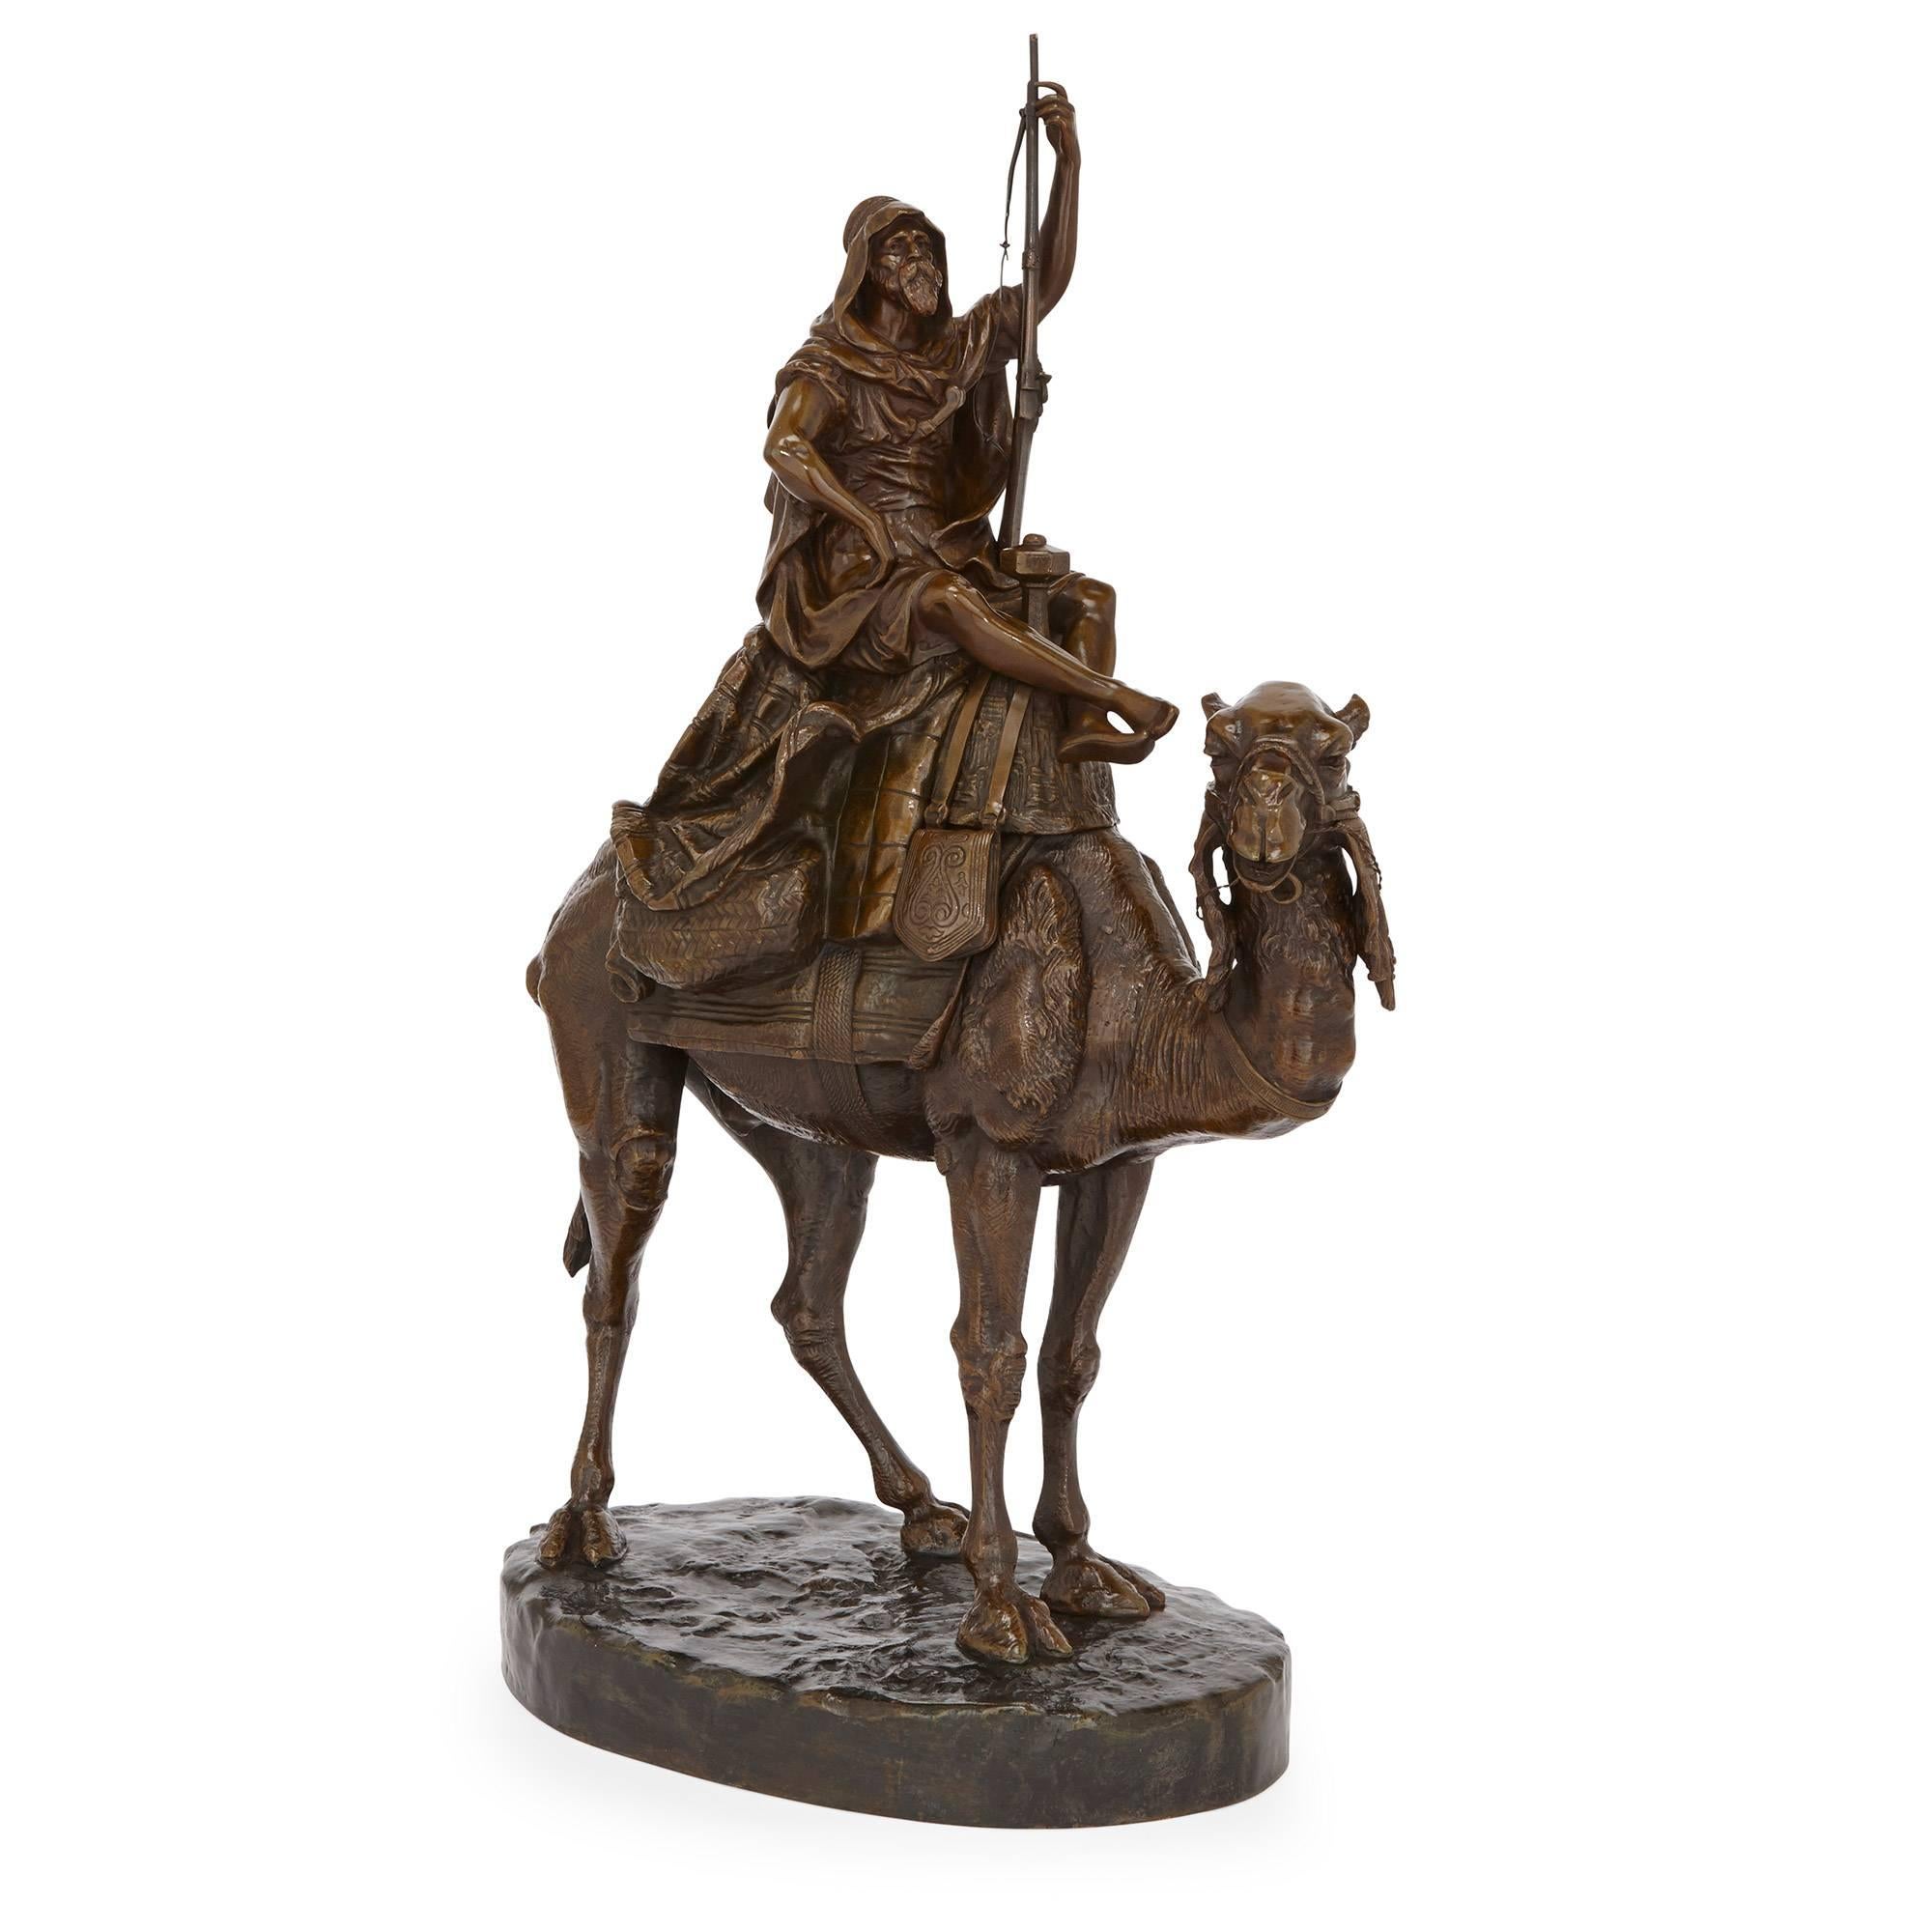 This stunning antique sculpture is finely crafted by Emile Pinedo, who was a master craftsman in creating works of Fine bronze. He is particularly well-known for his refined Orientalist style, which won much critical acclaim throughout his career.